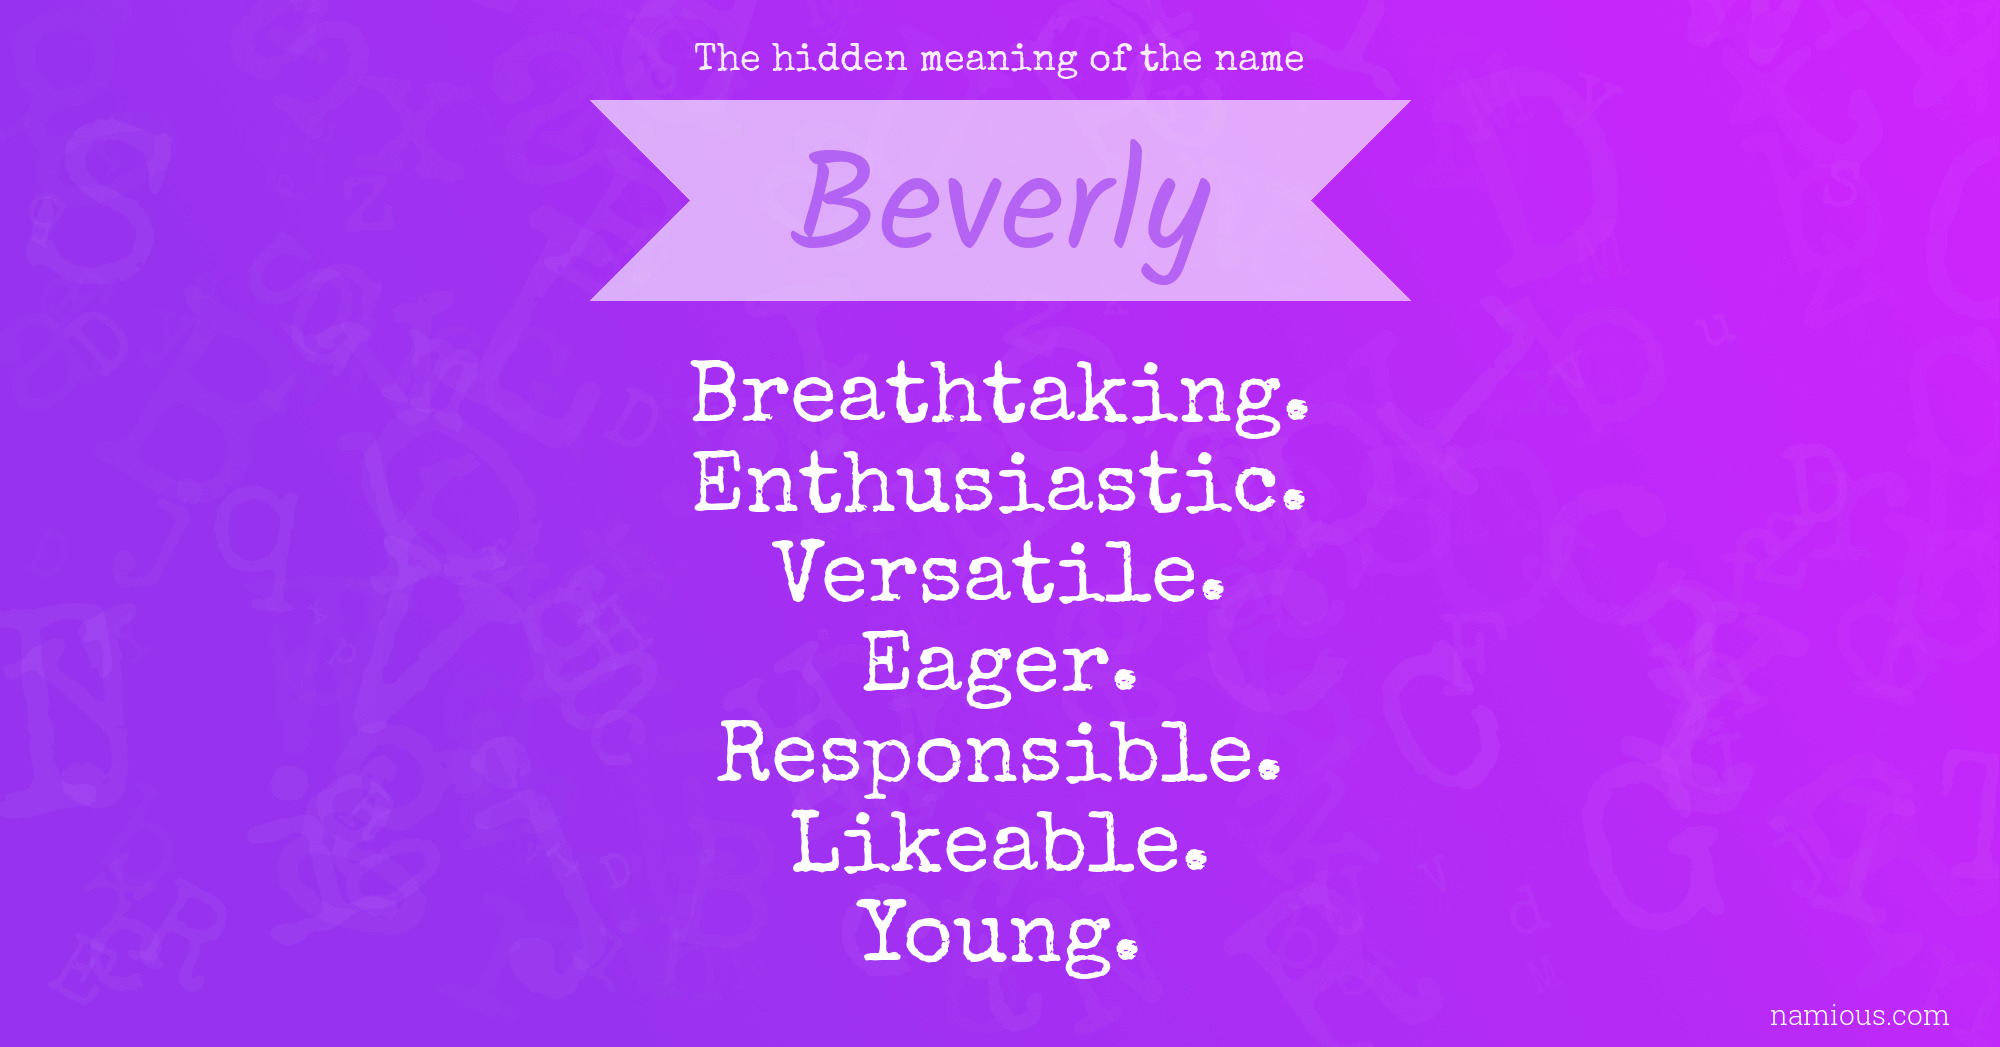 The hidden meaning of the name Beverly